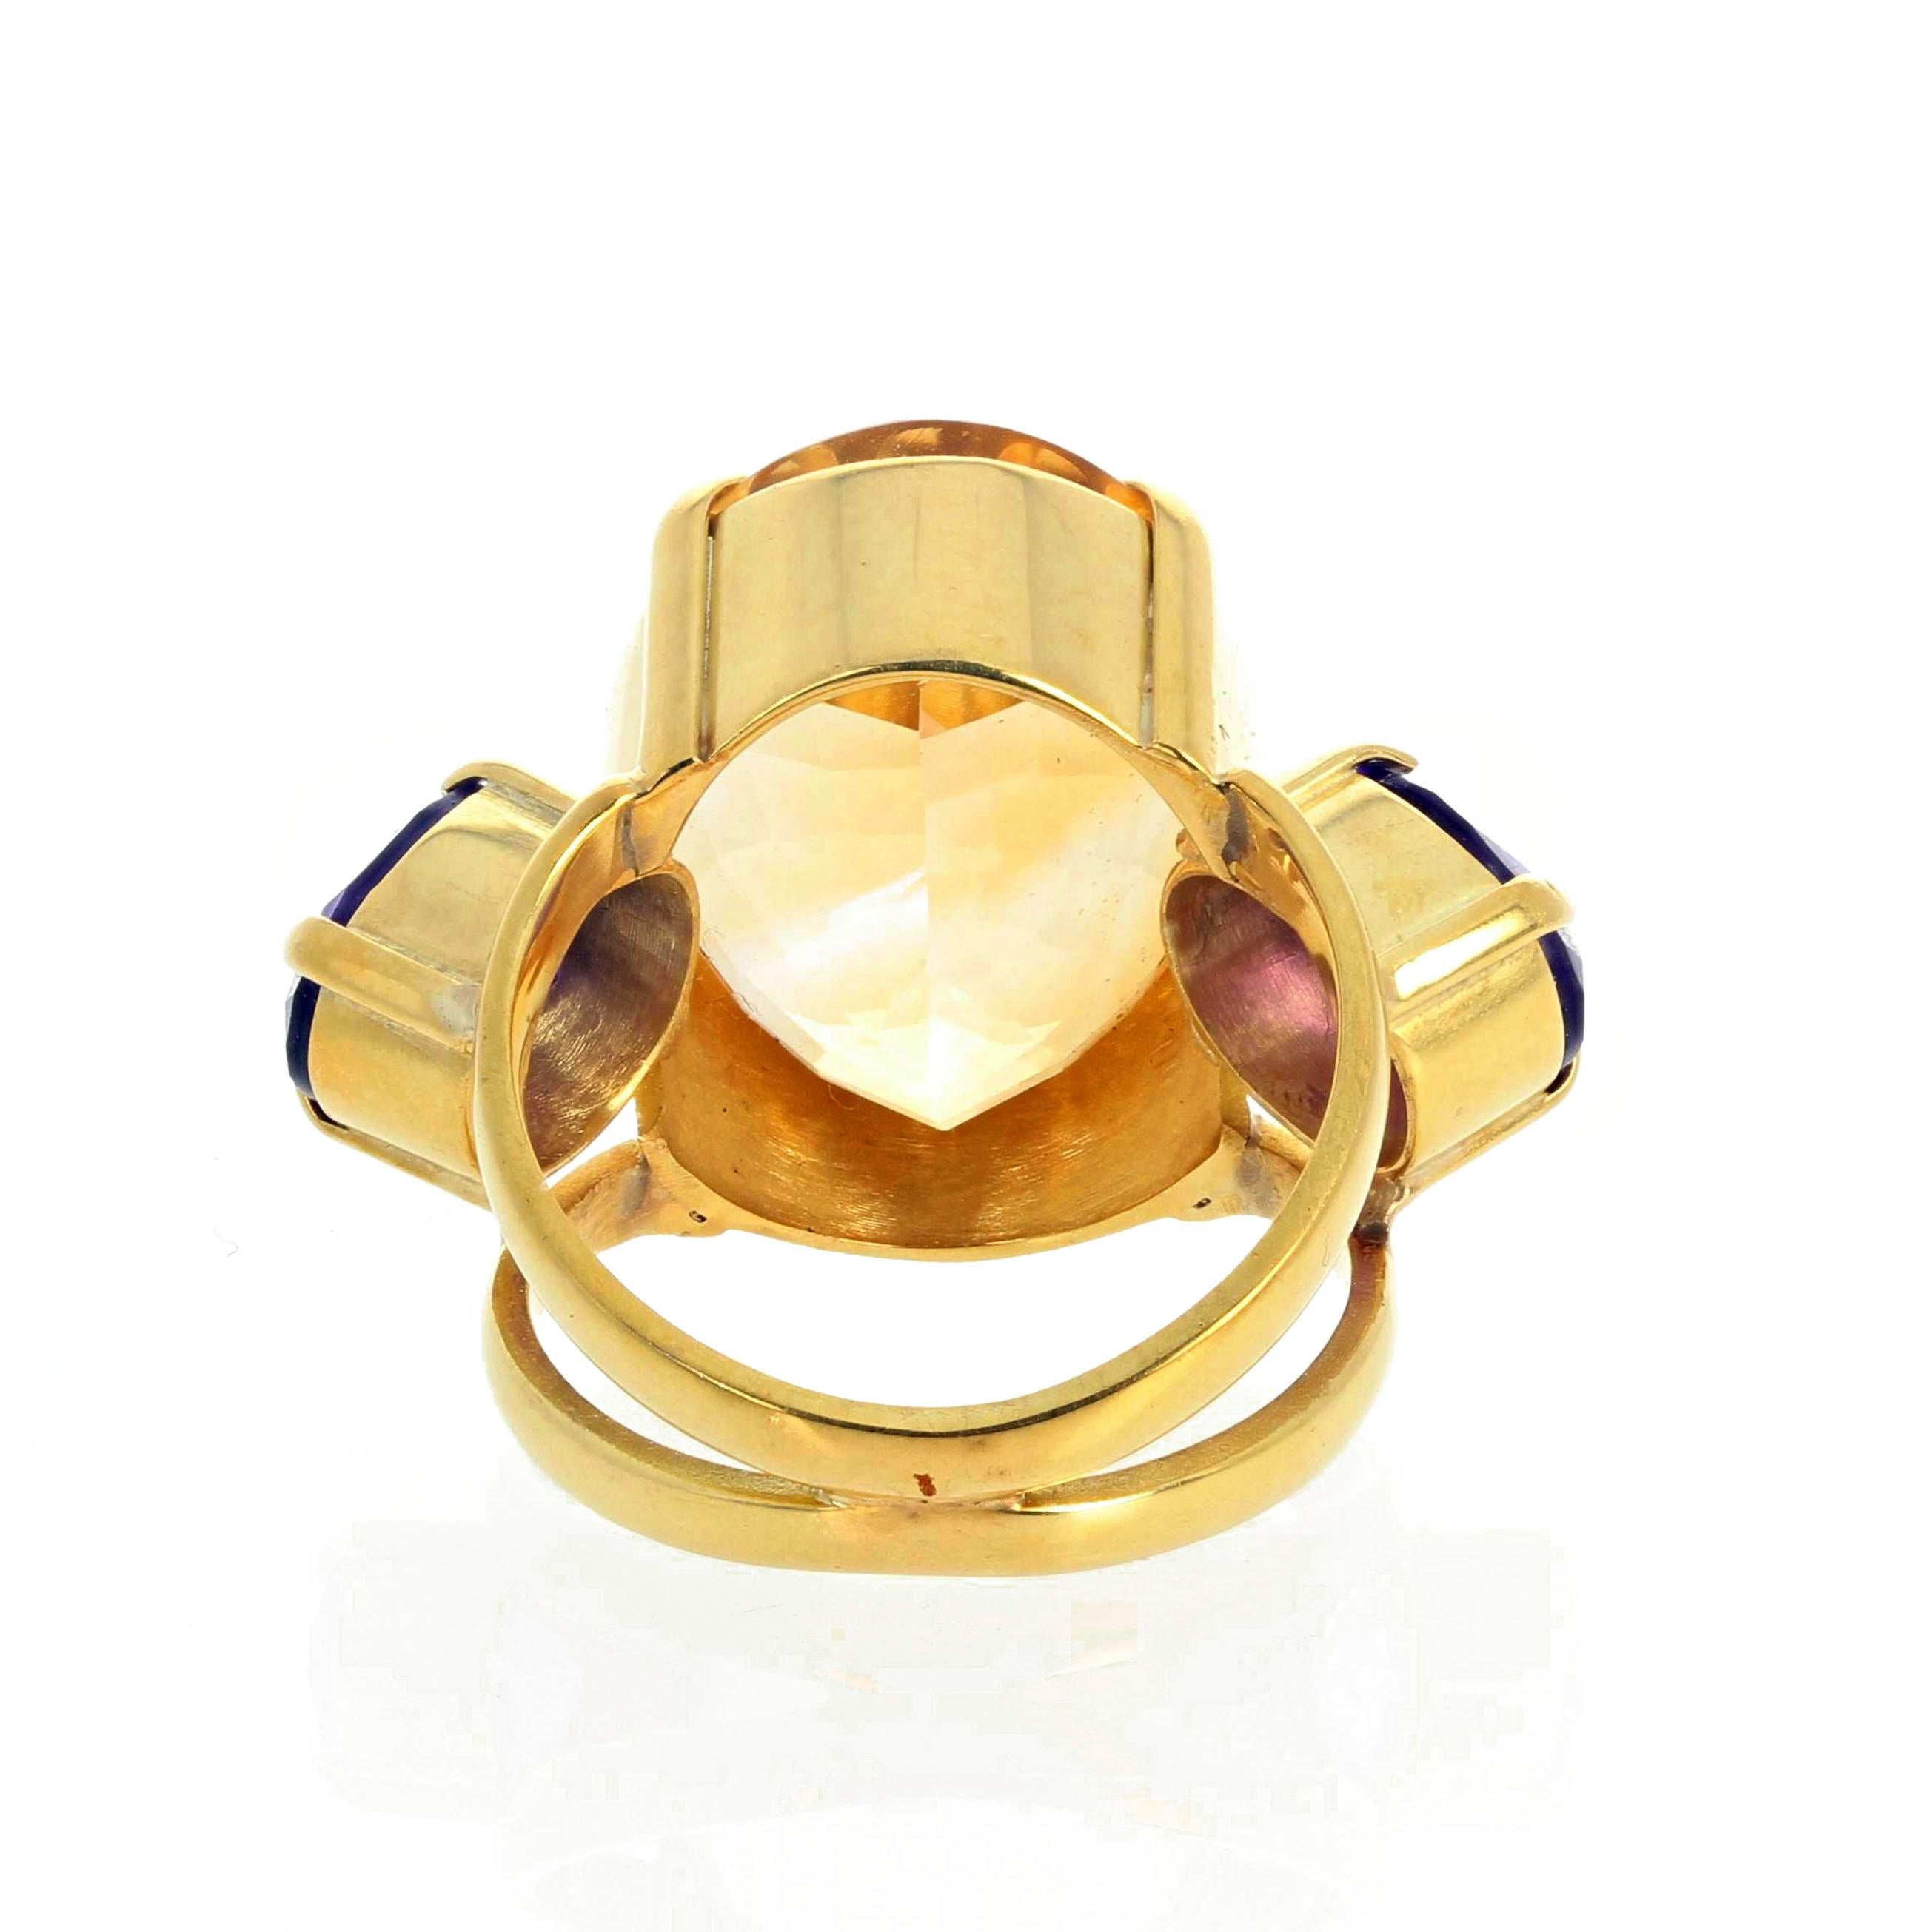 Oval Cut AJD Gloriously Beautiful 26Ct Citrine & Amethyst Impressive 18K Yellow Gold Ring For Sale